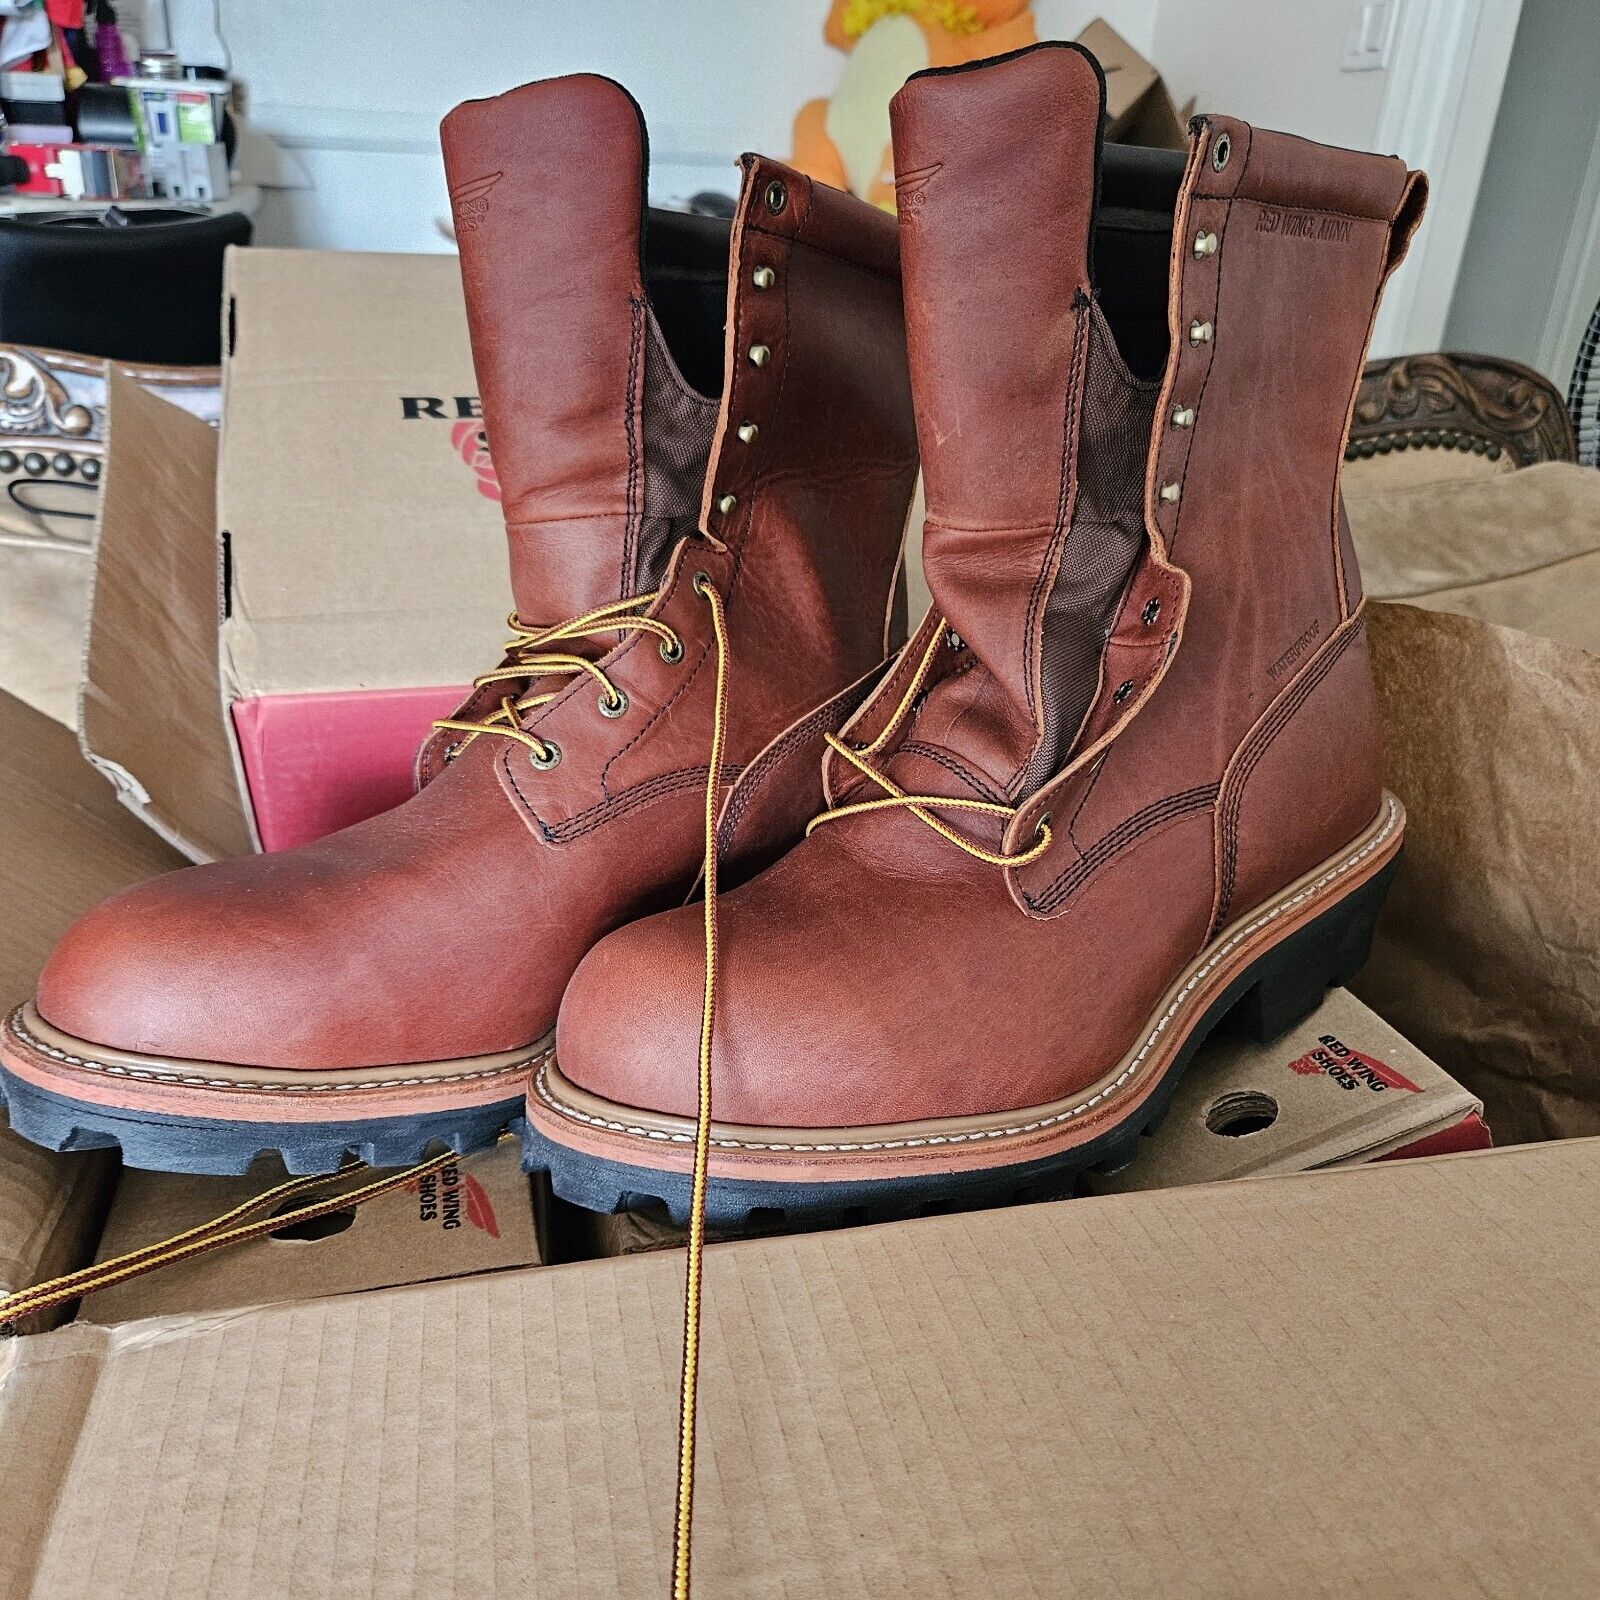 Red Wing Boots 217 Size  14